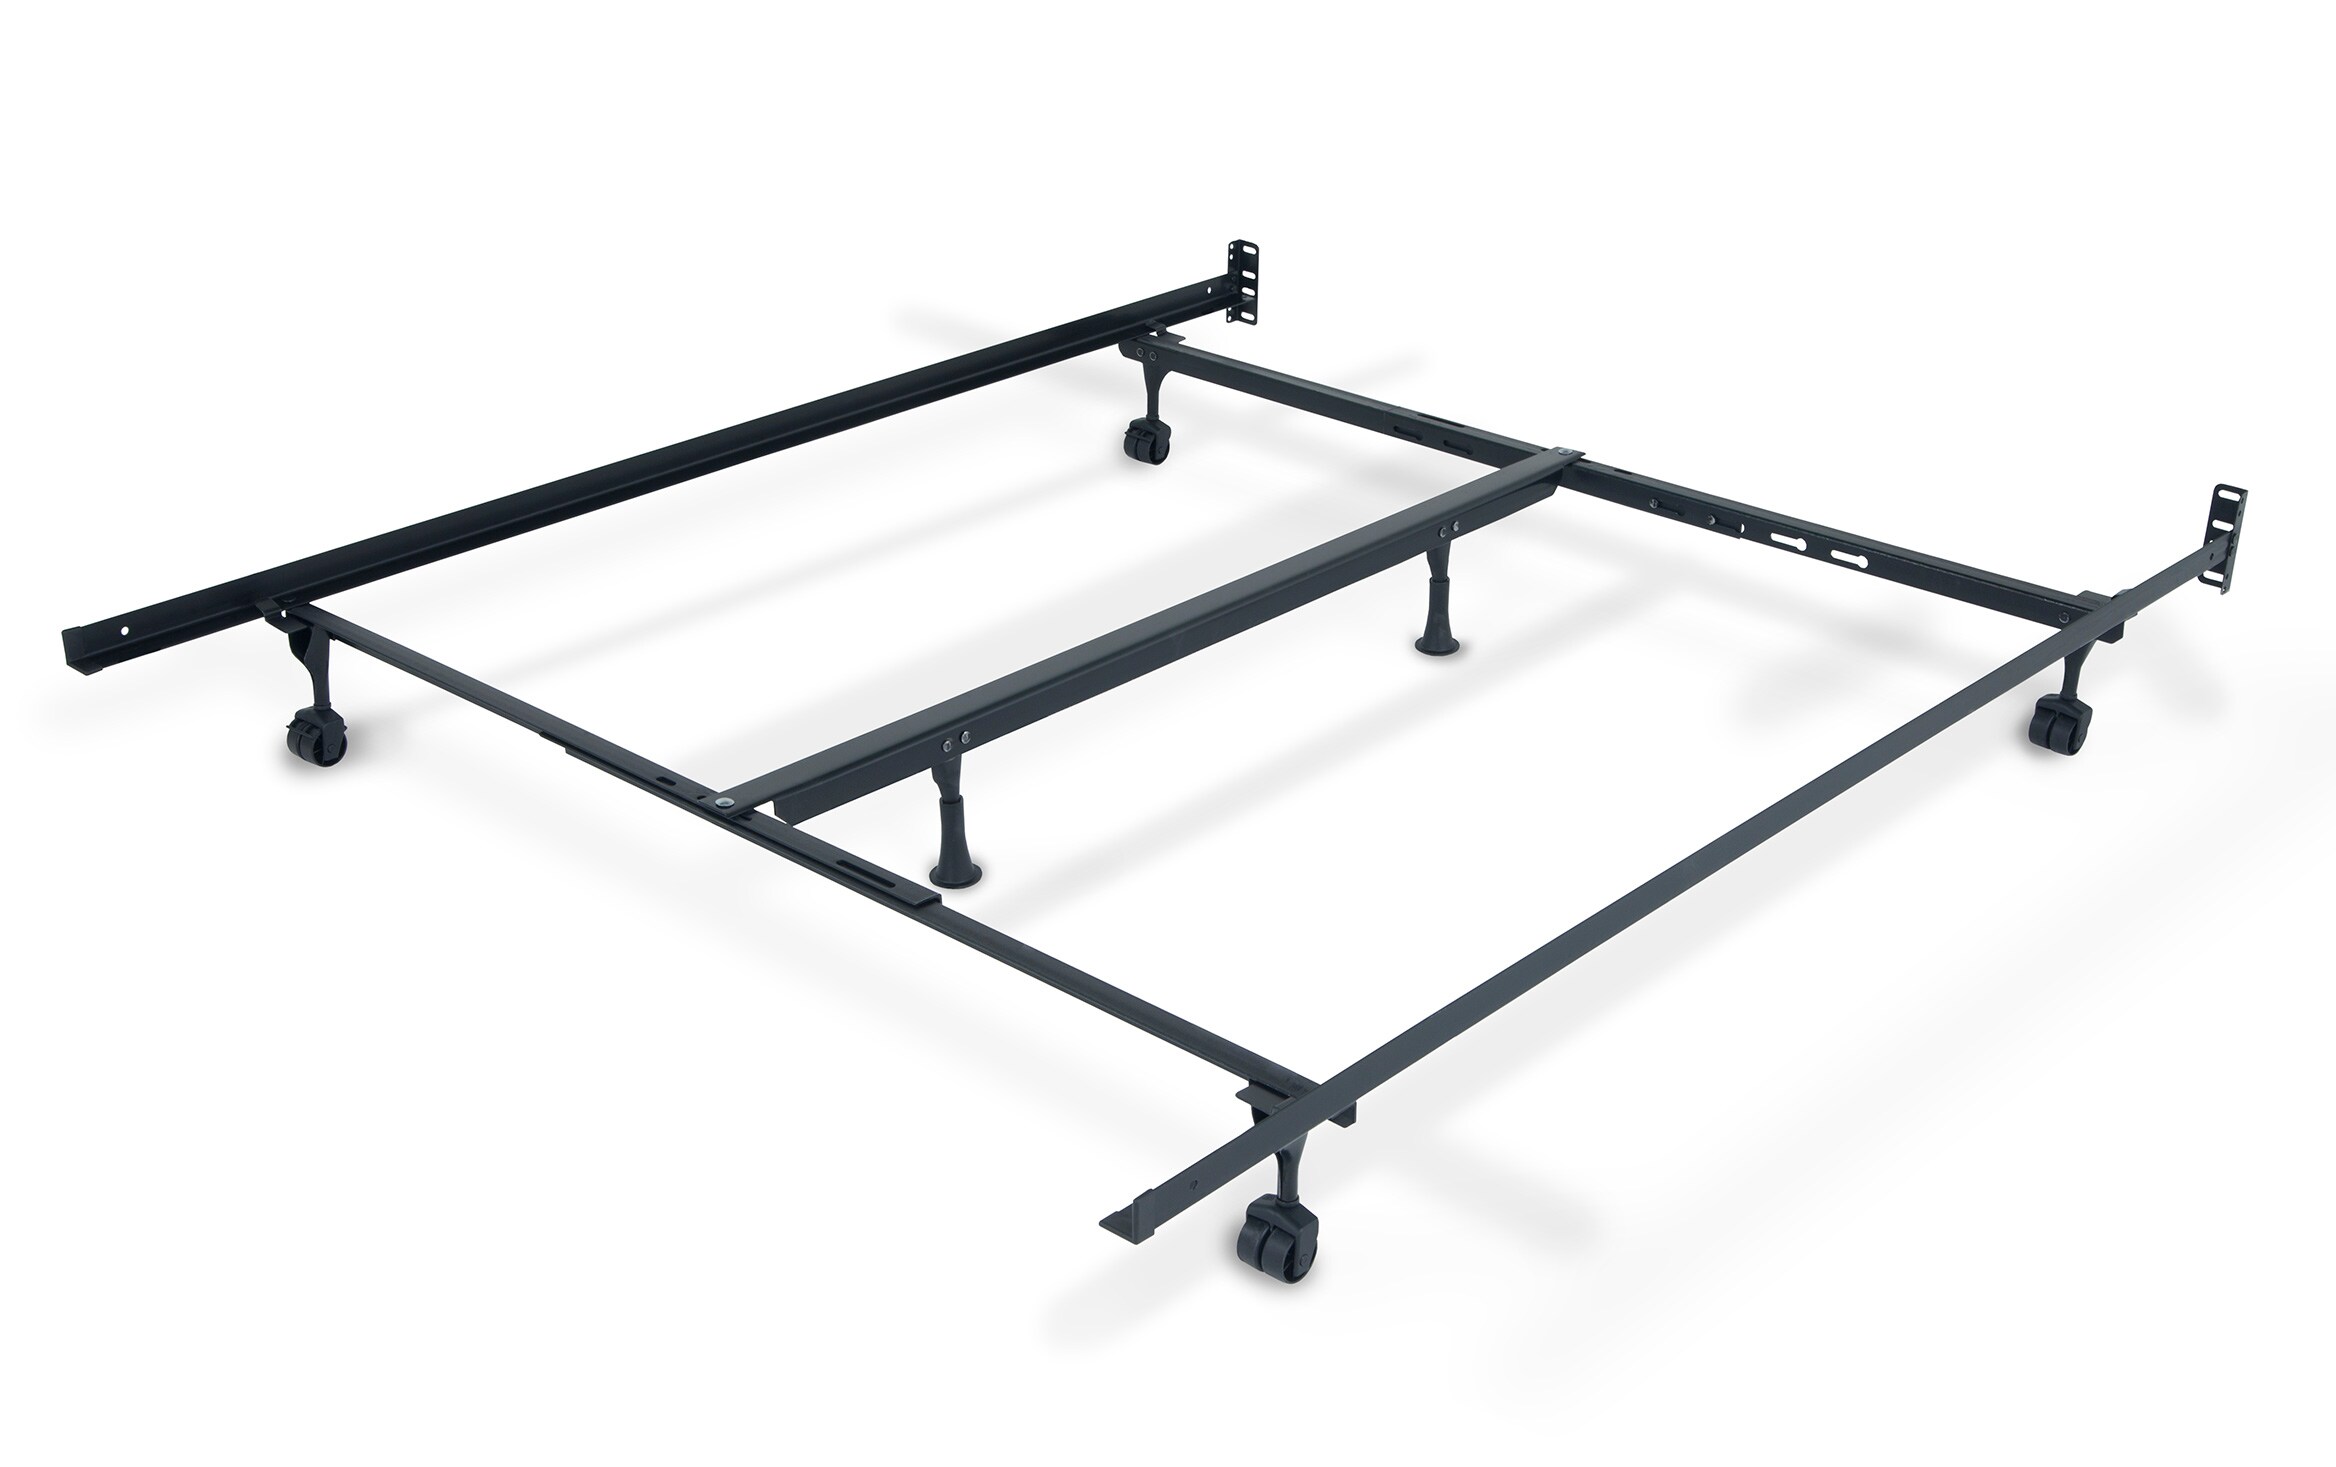 Queen King Bed Frame With Casters Bob, Bed Frame Glide Legs To Replace Wheels